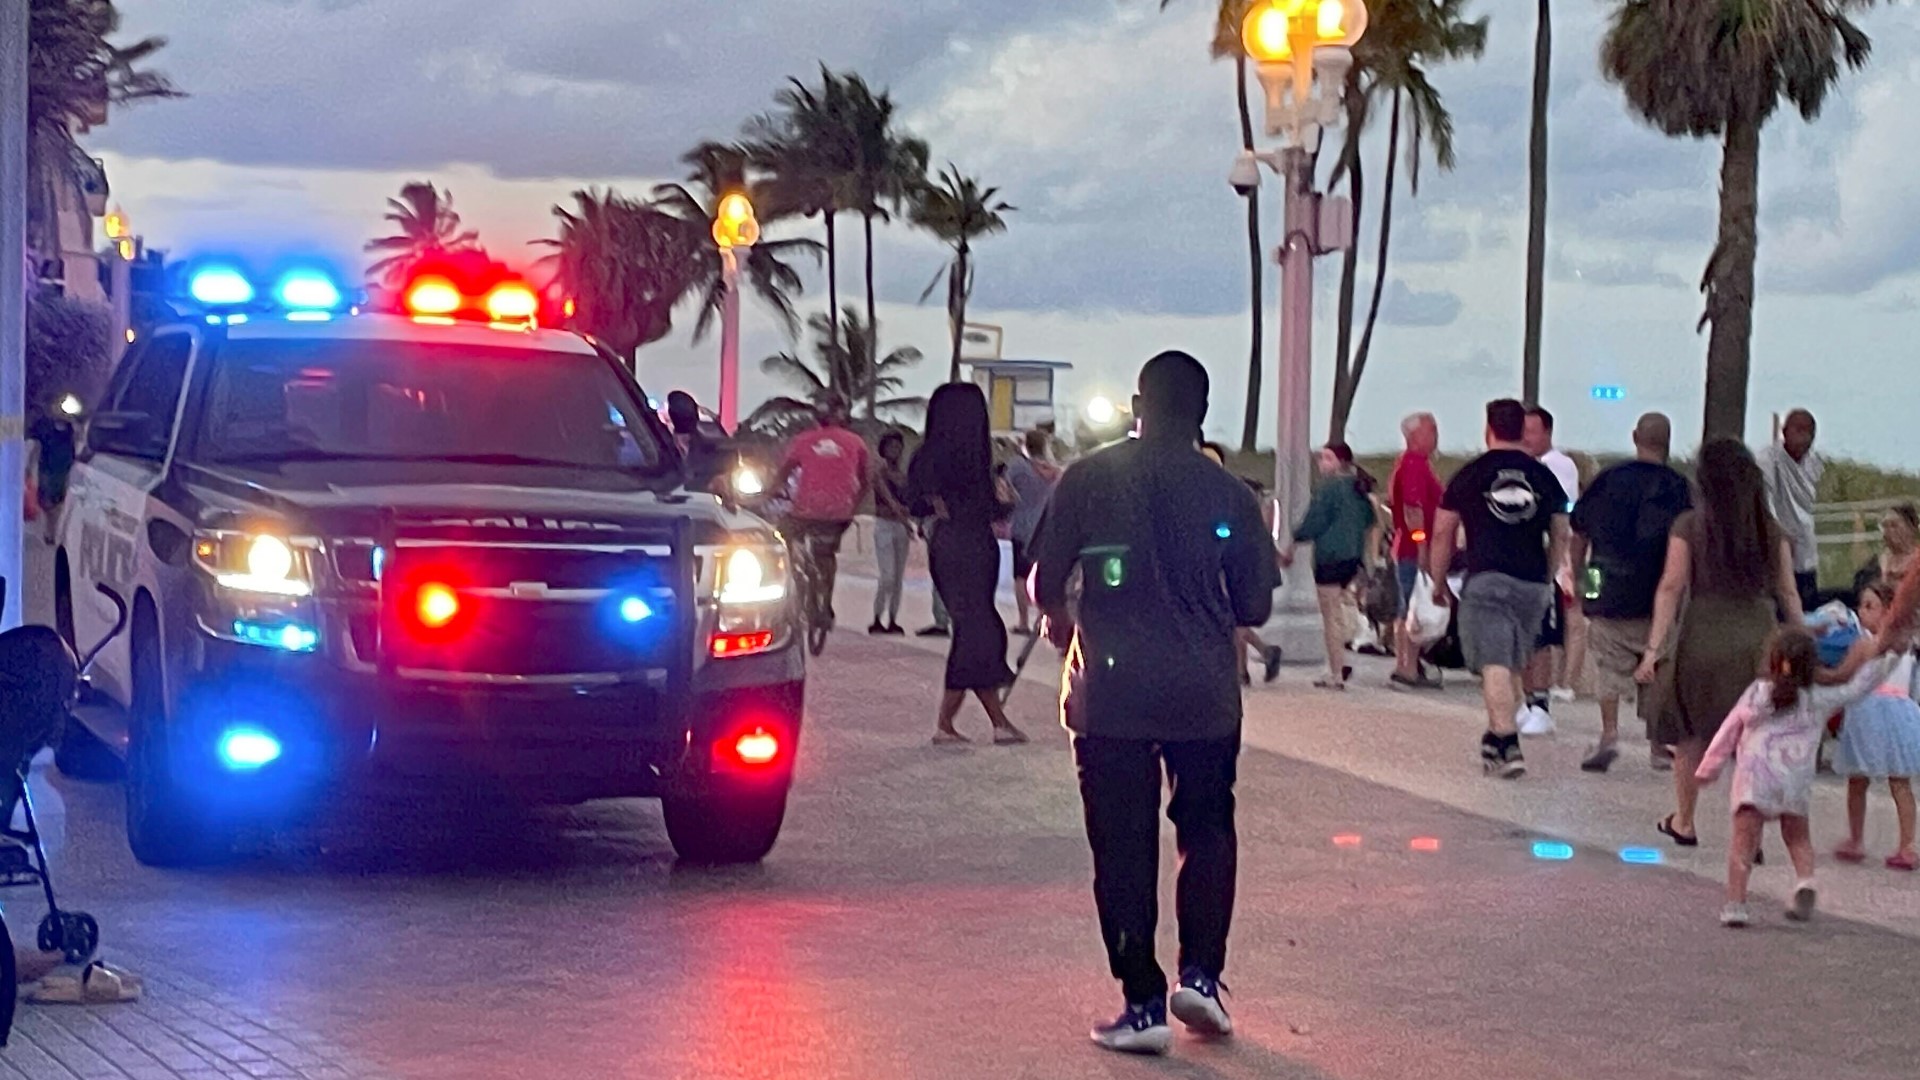 An altercation between two groups led to the gunfire that sent people running for cover along the crowded beach on Memorial Day, police said.